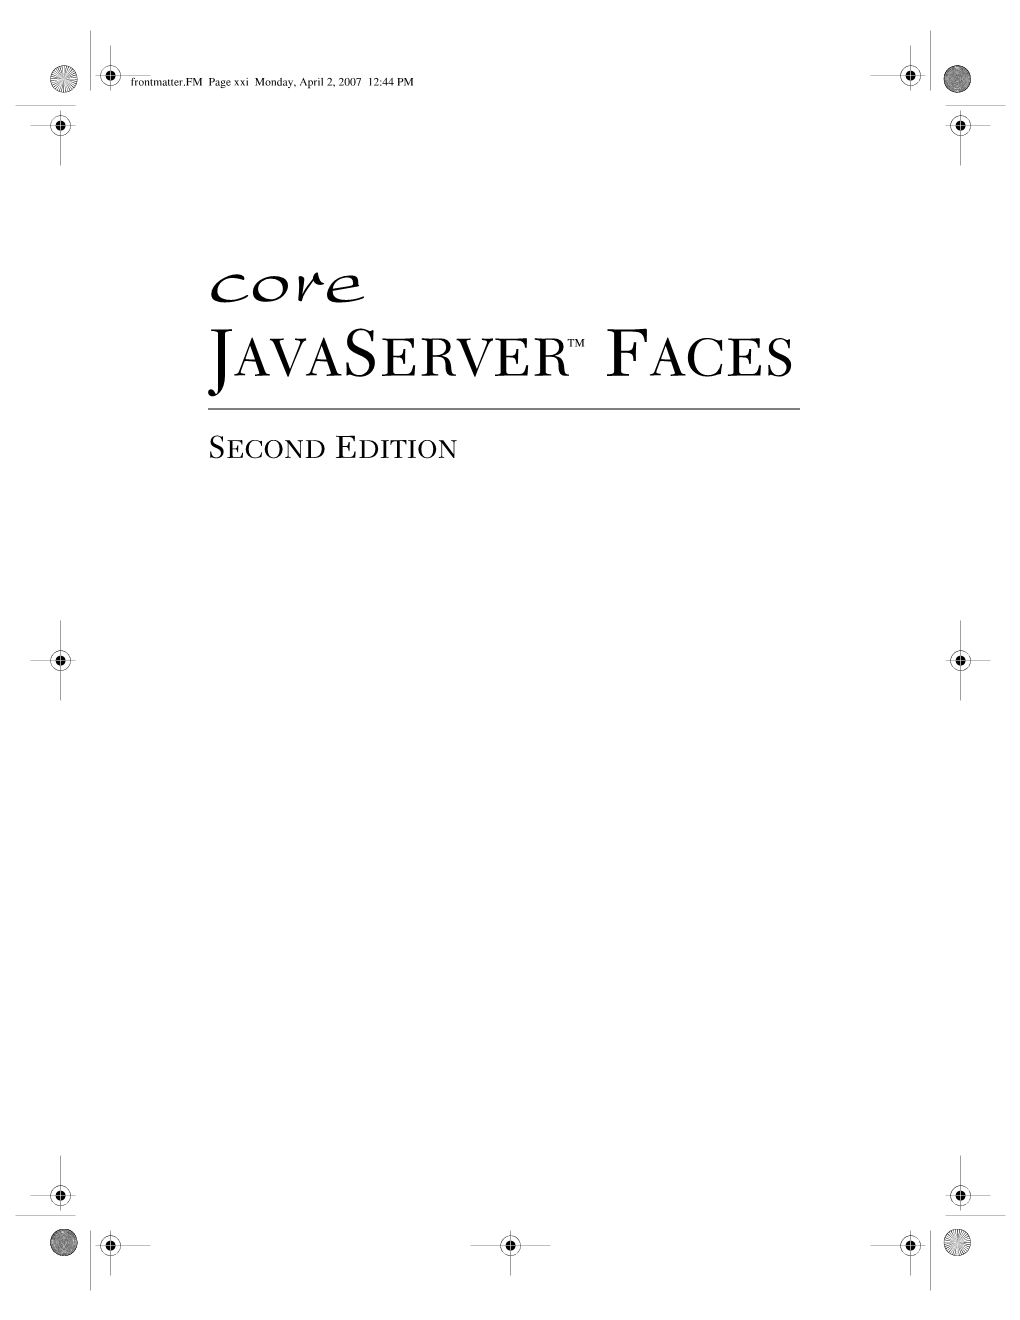 Javaserver™ Faces